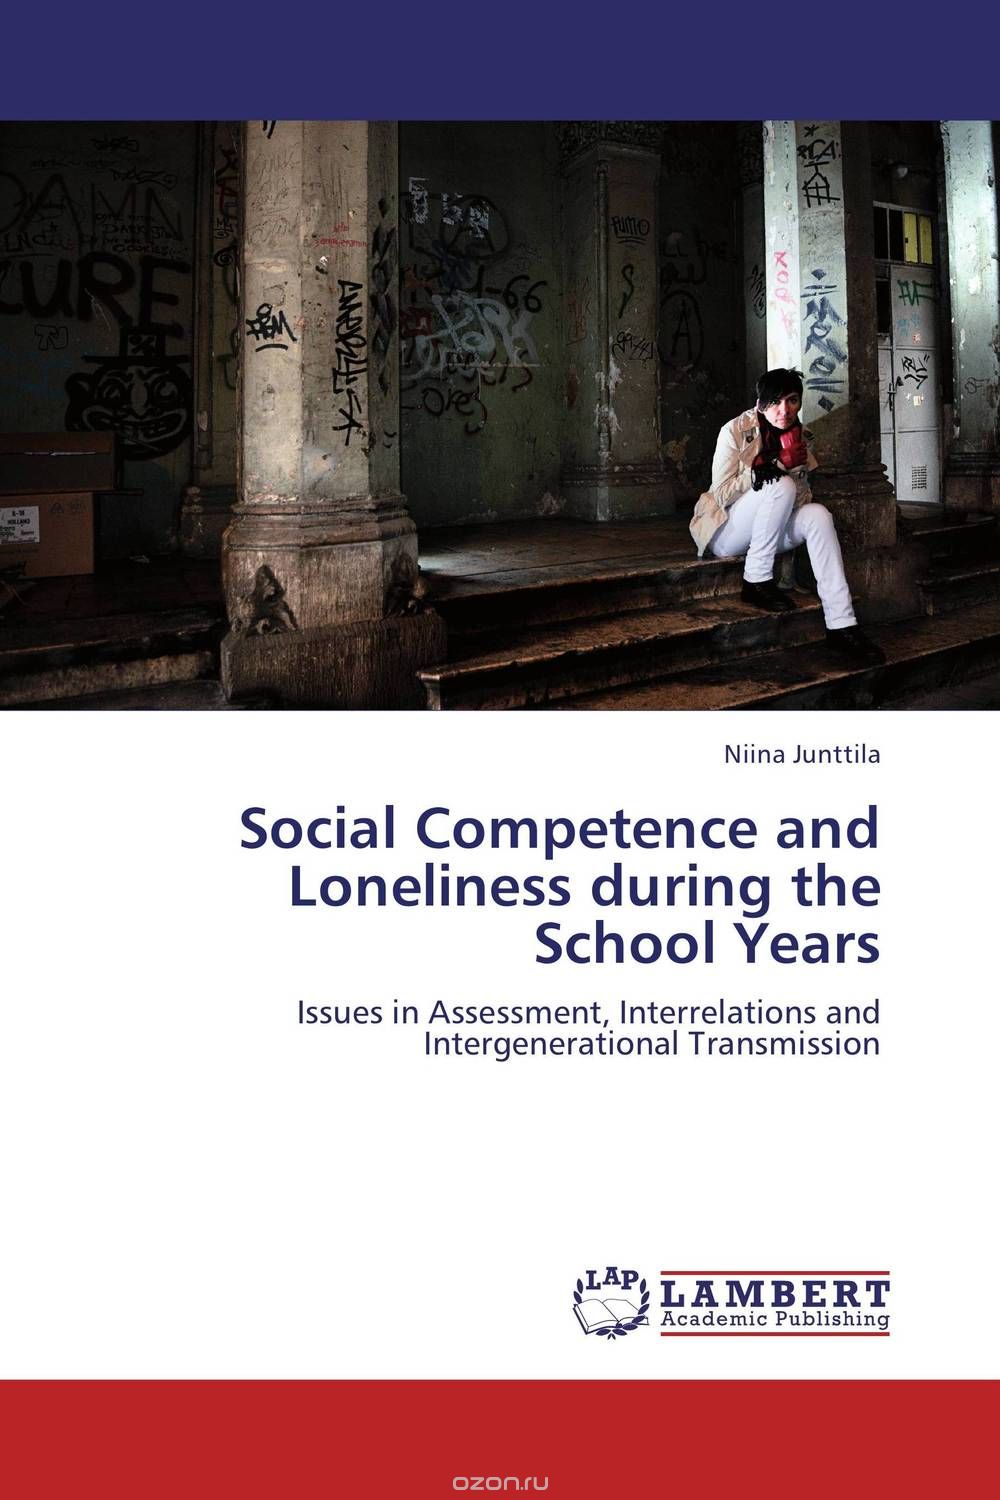 Скачать книгу "Social Competence and Loneliness during the School Years"